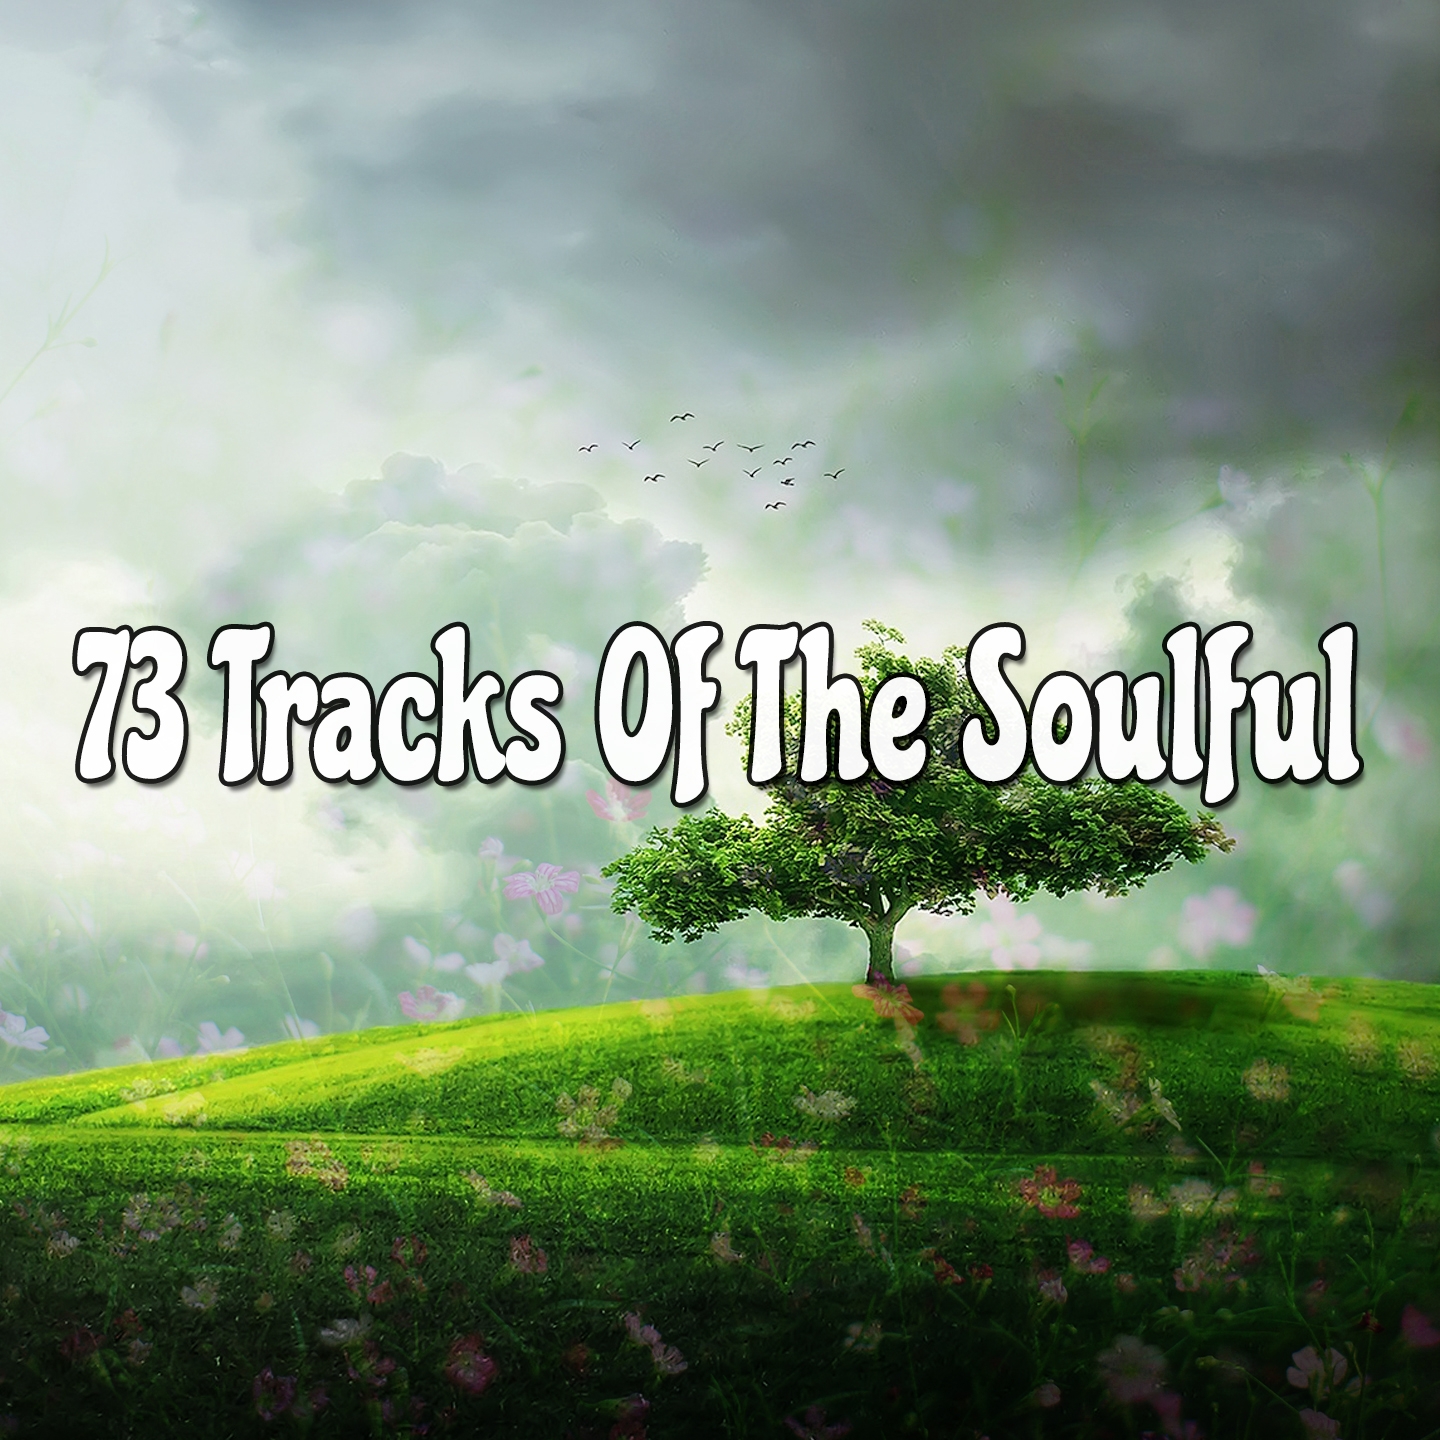 73 Tracks Of The Soulful